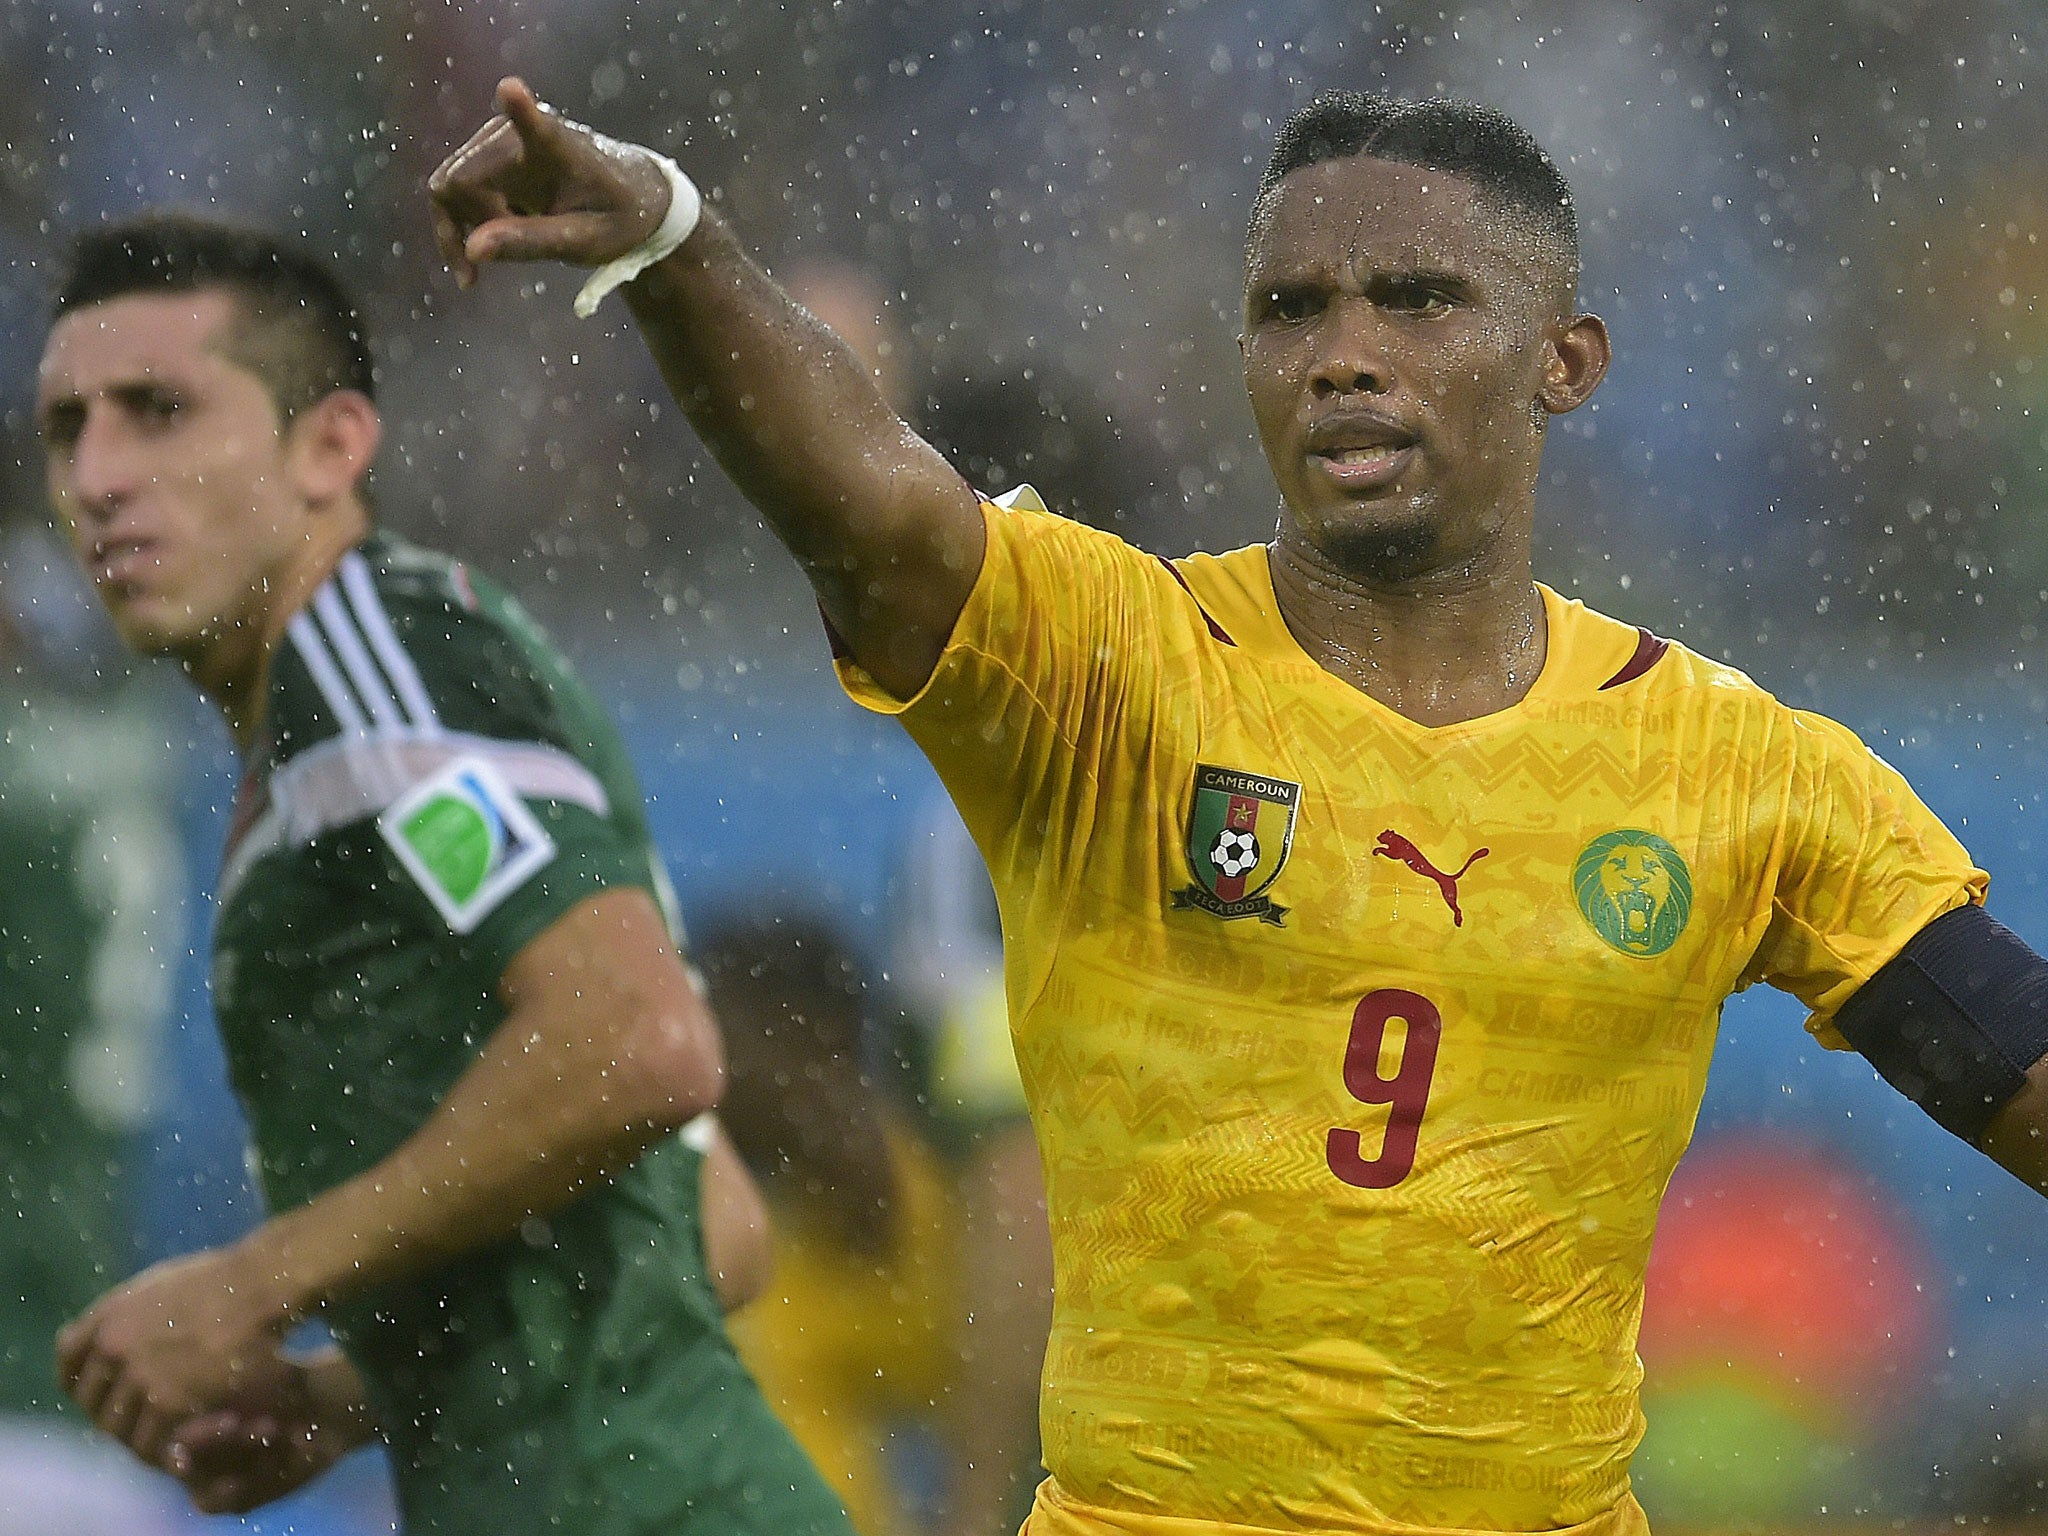 Samuel Eto'o in action during the recent World Cup in Brazil